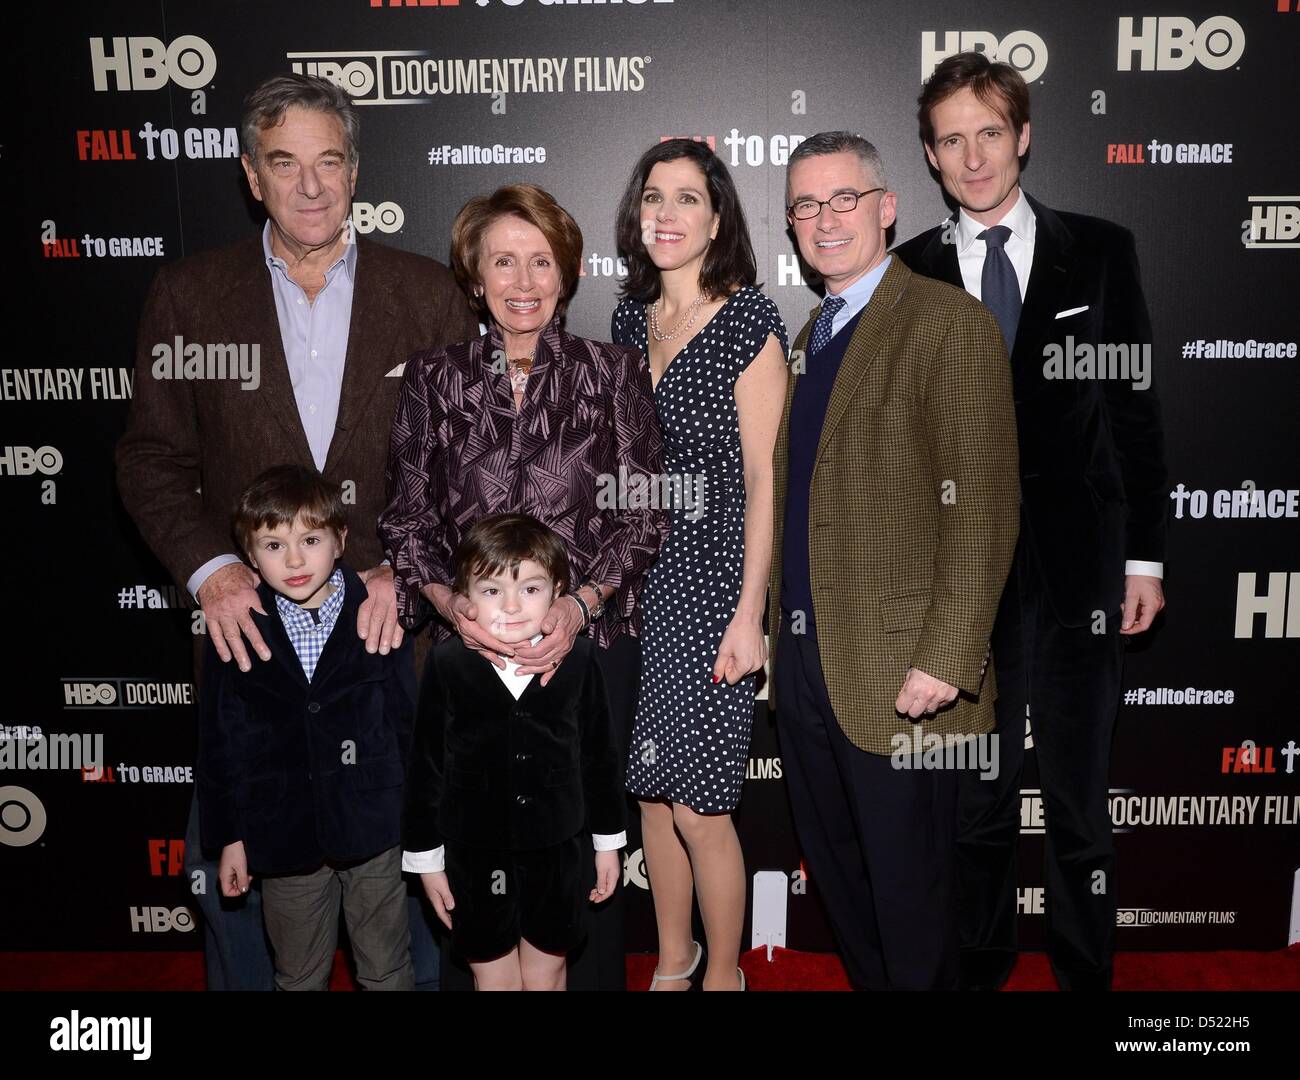 New York, USA. 21st March 2013. Paul Pelosi, Nancy Pelosi, Paul Vos, Thomas Vos, Alexandra Pelosi, Jim McGreevey, Michiel Vos at arrivals for FALL TO GRACE Premiere, Time Warner Center, New York, NY March 21, 2013. Photo By: Eli Winston/Everett Collection/Alamy Live News Stock Photo